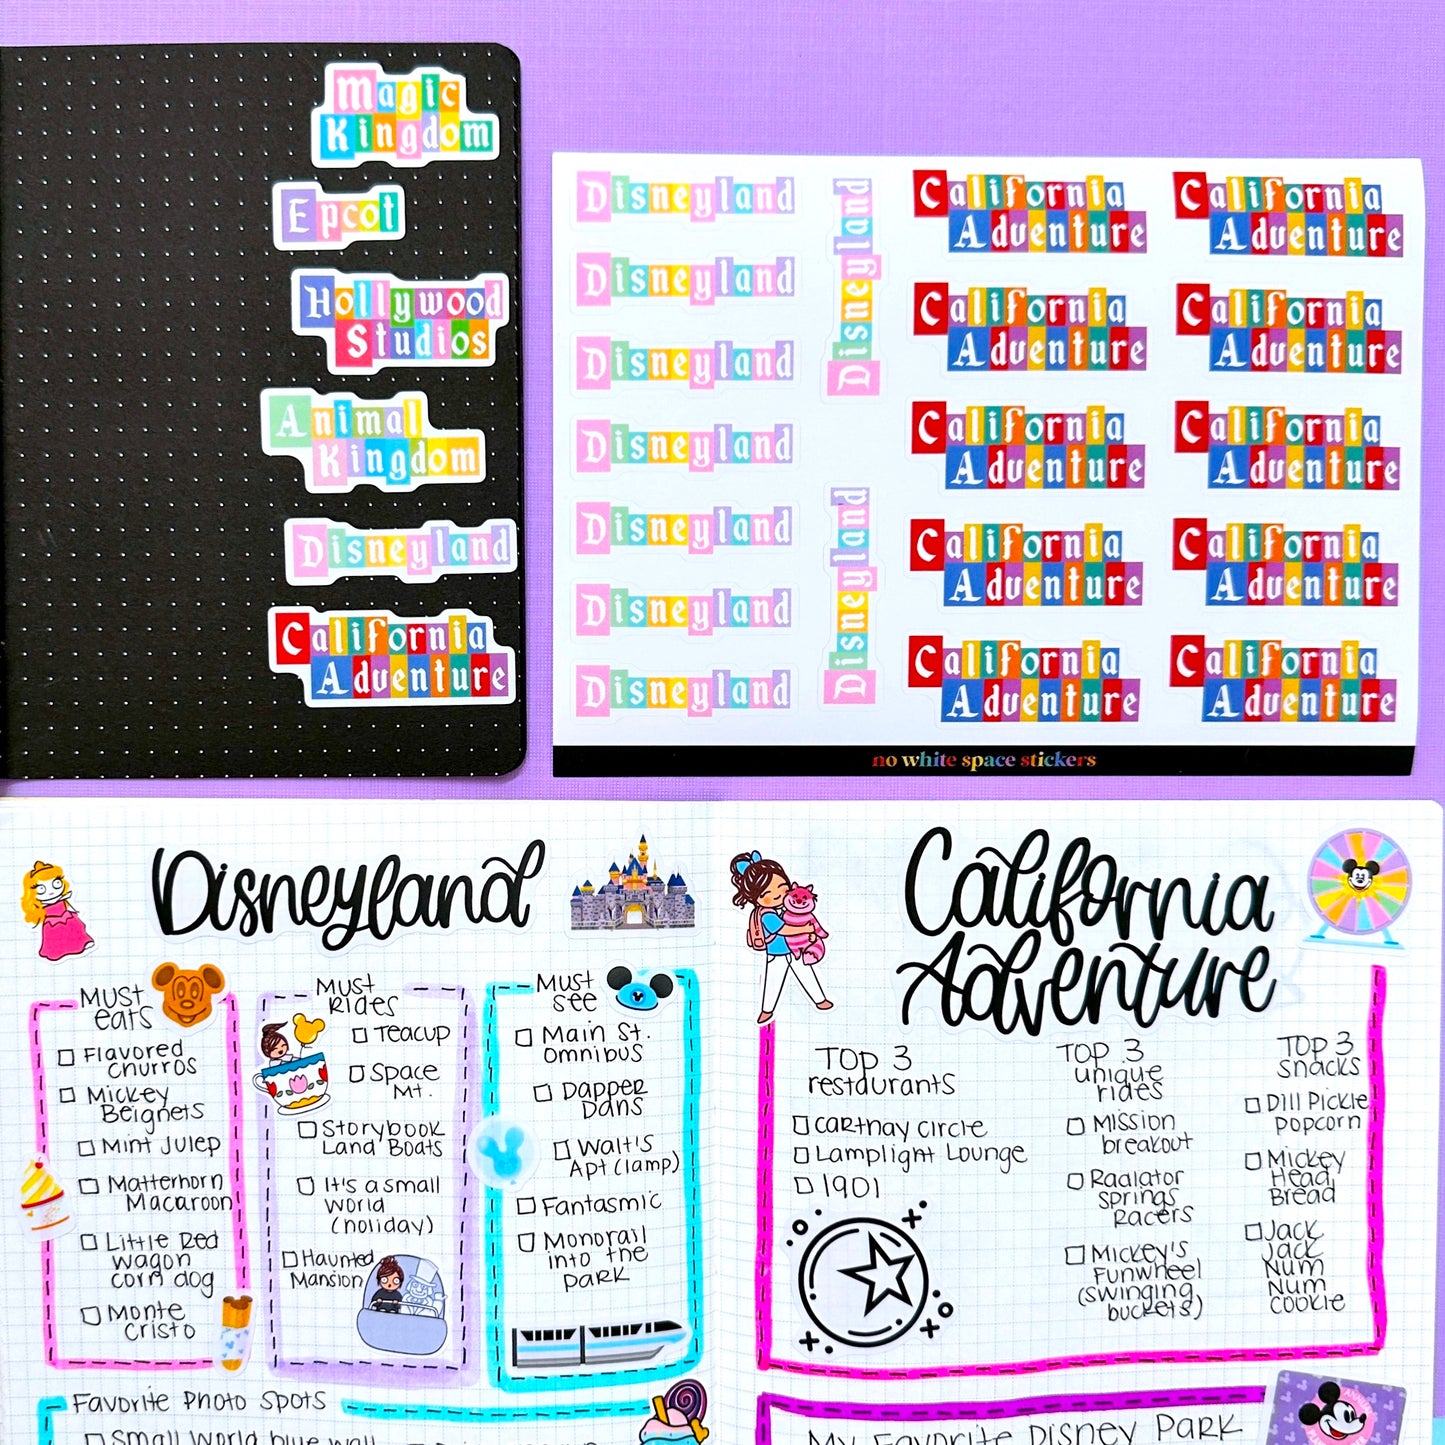 Journaling PAPER Stickers - Vintage Park Day Signs